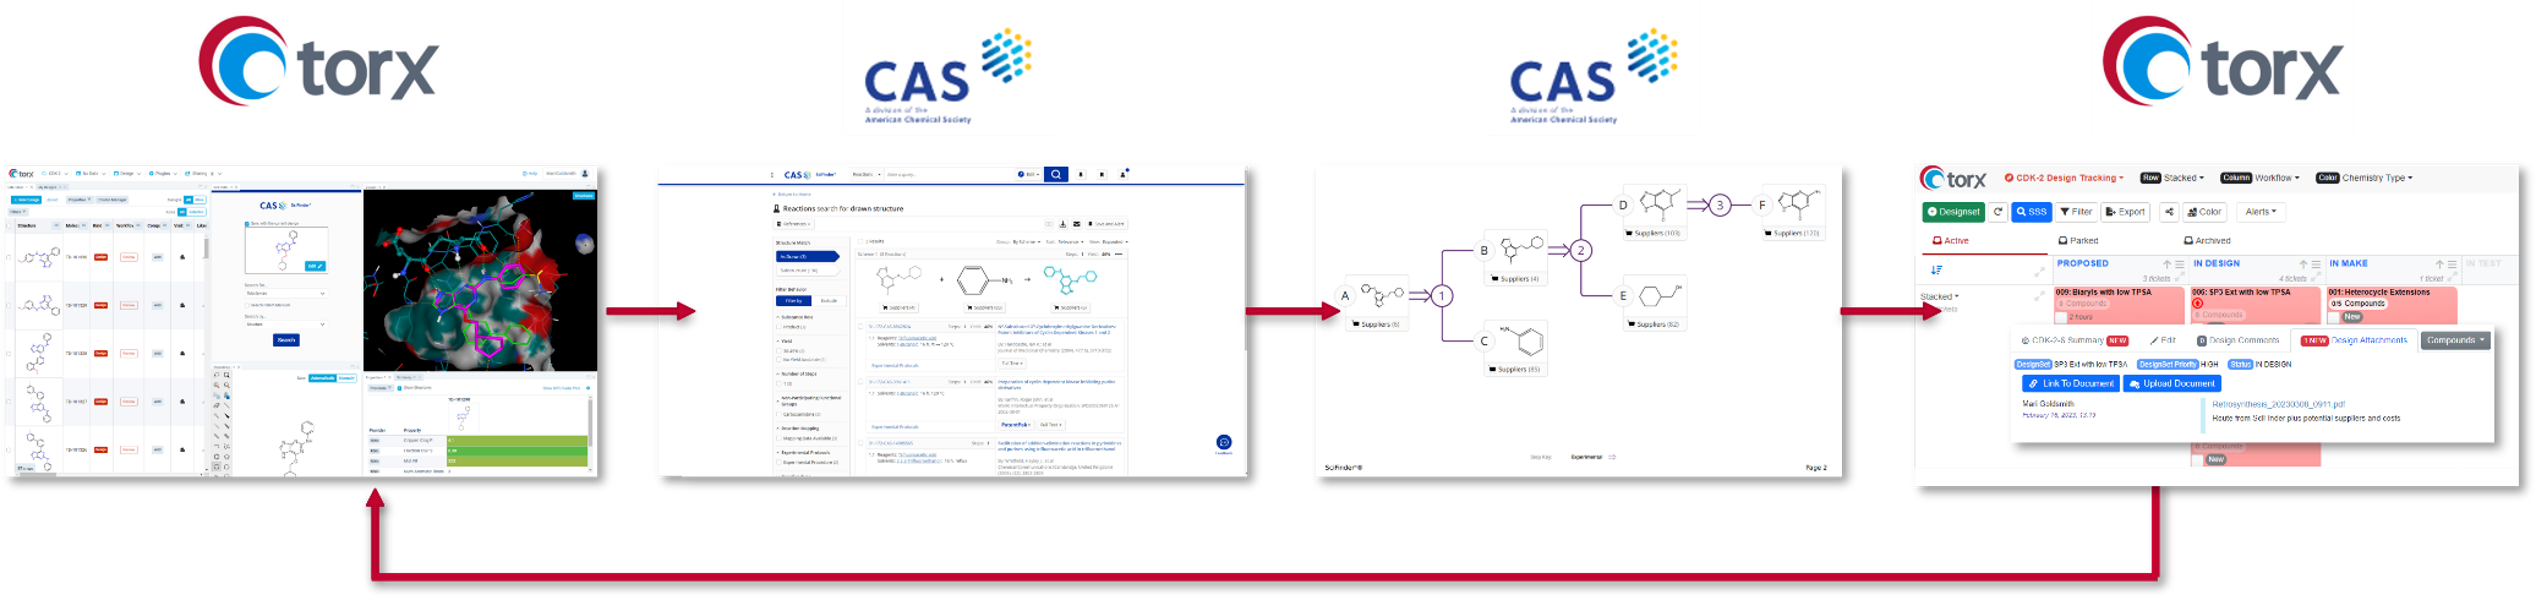 Figure 2. Chemists gain quick insights on synthetic feasibility and available IP position from CAS SciFindern through its dedicated plugin in Torx Design.